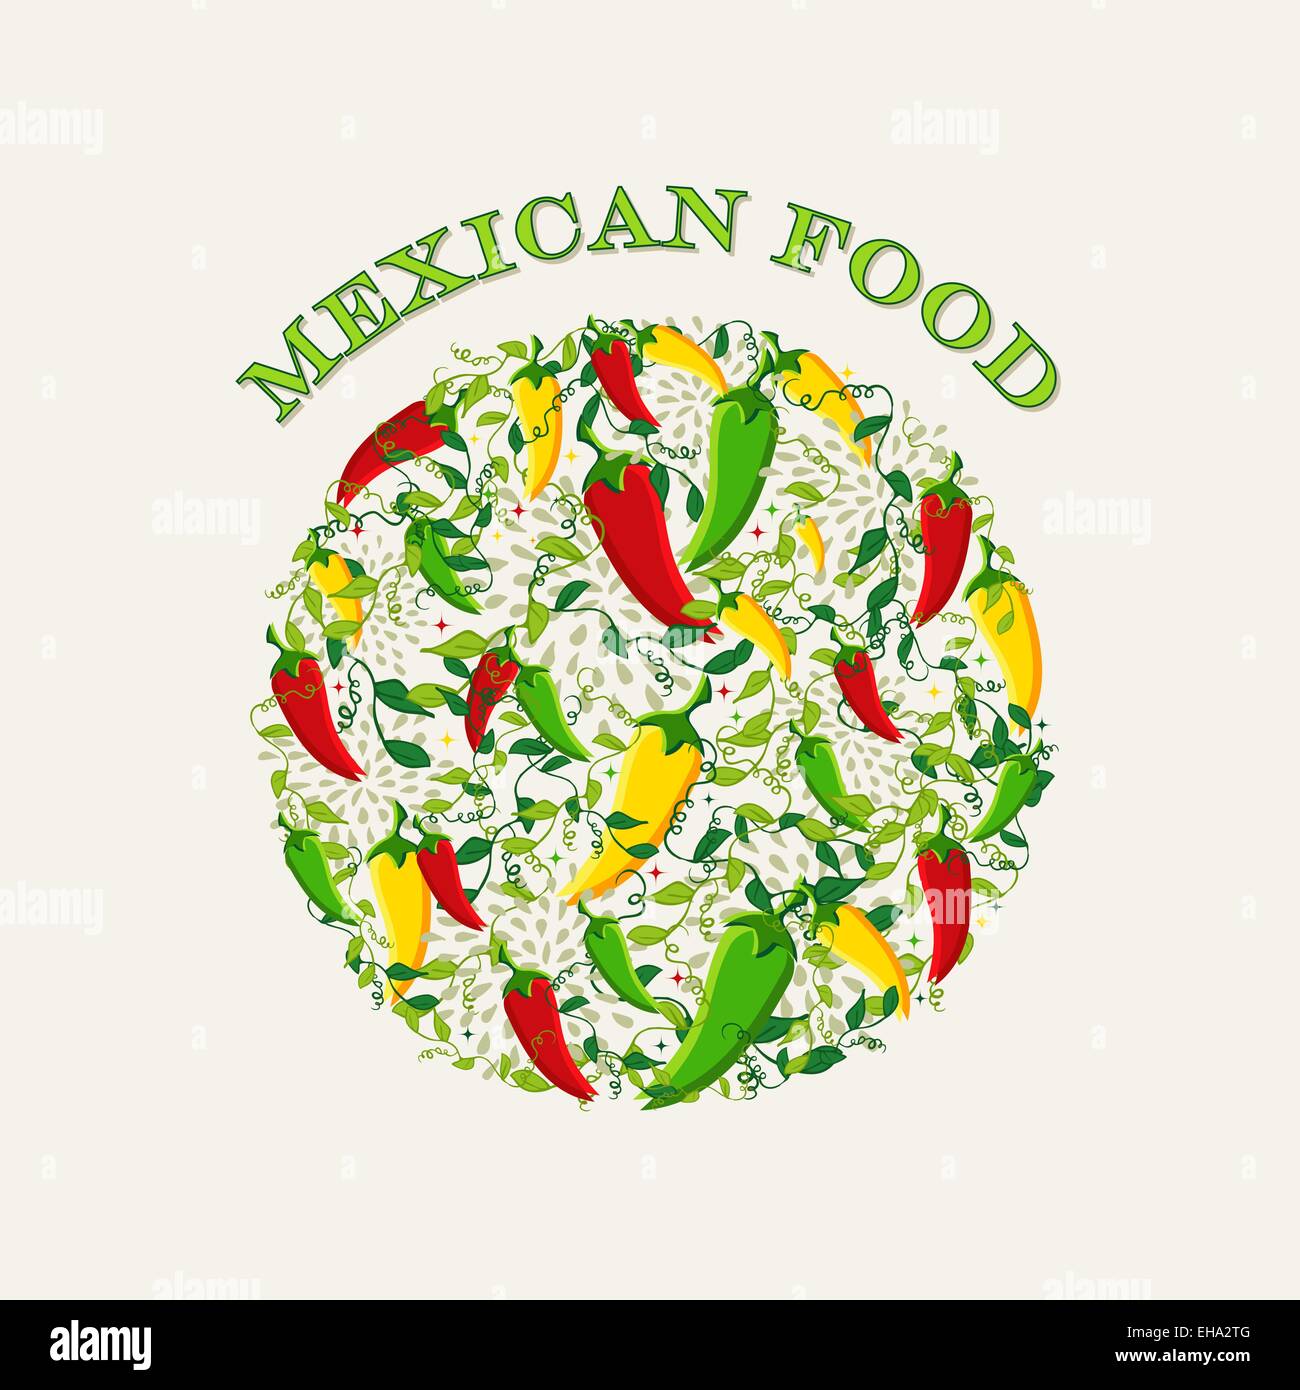 Mexican food background illustration with colorful chili pepper circle shape. Ideas for menu, card, poster and flyer design. Stock Vector